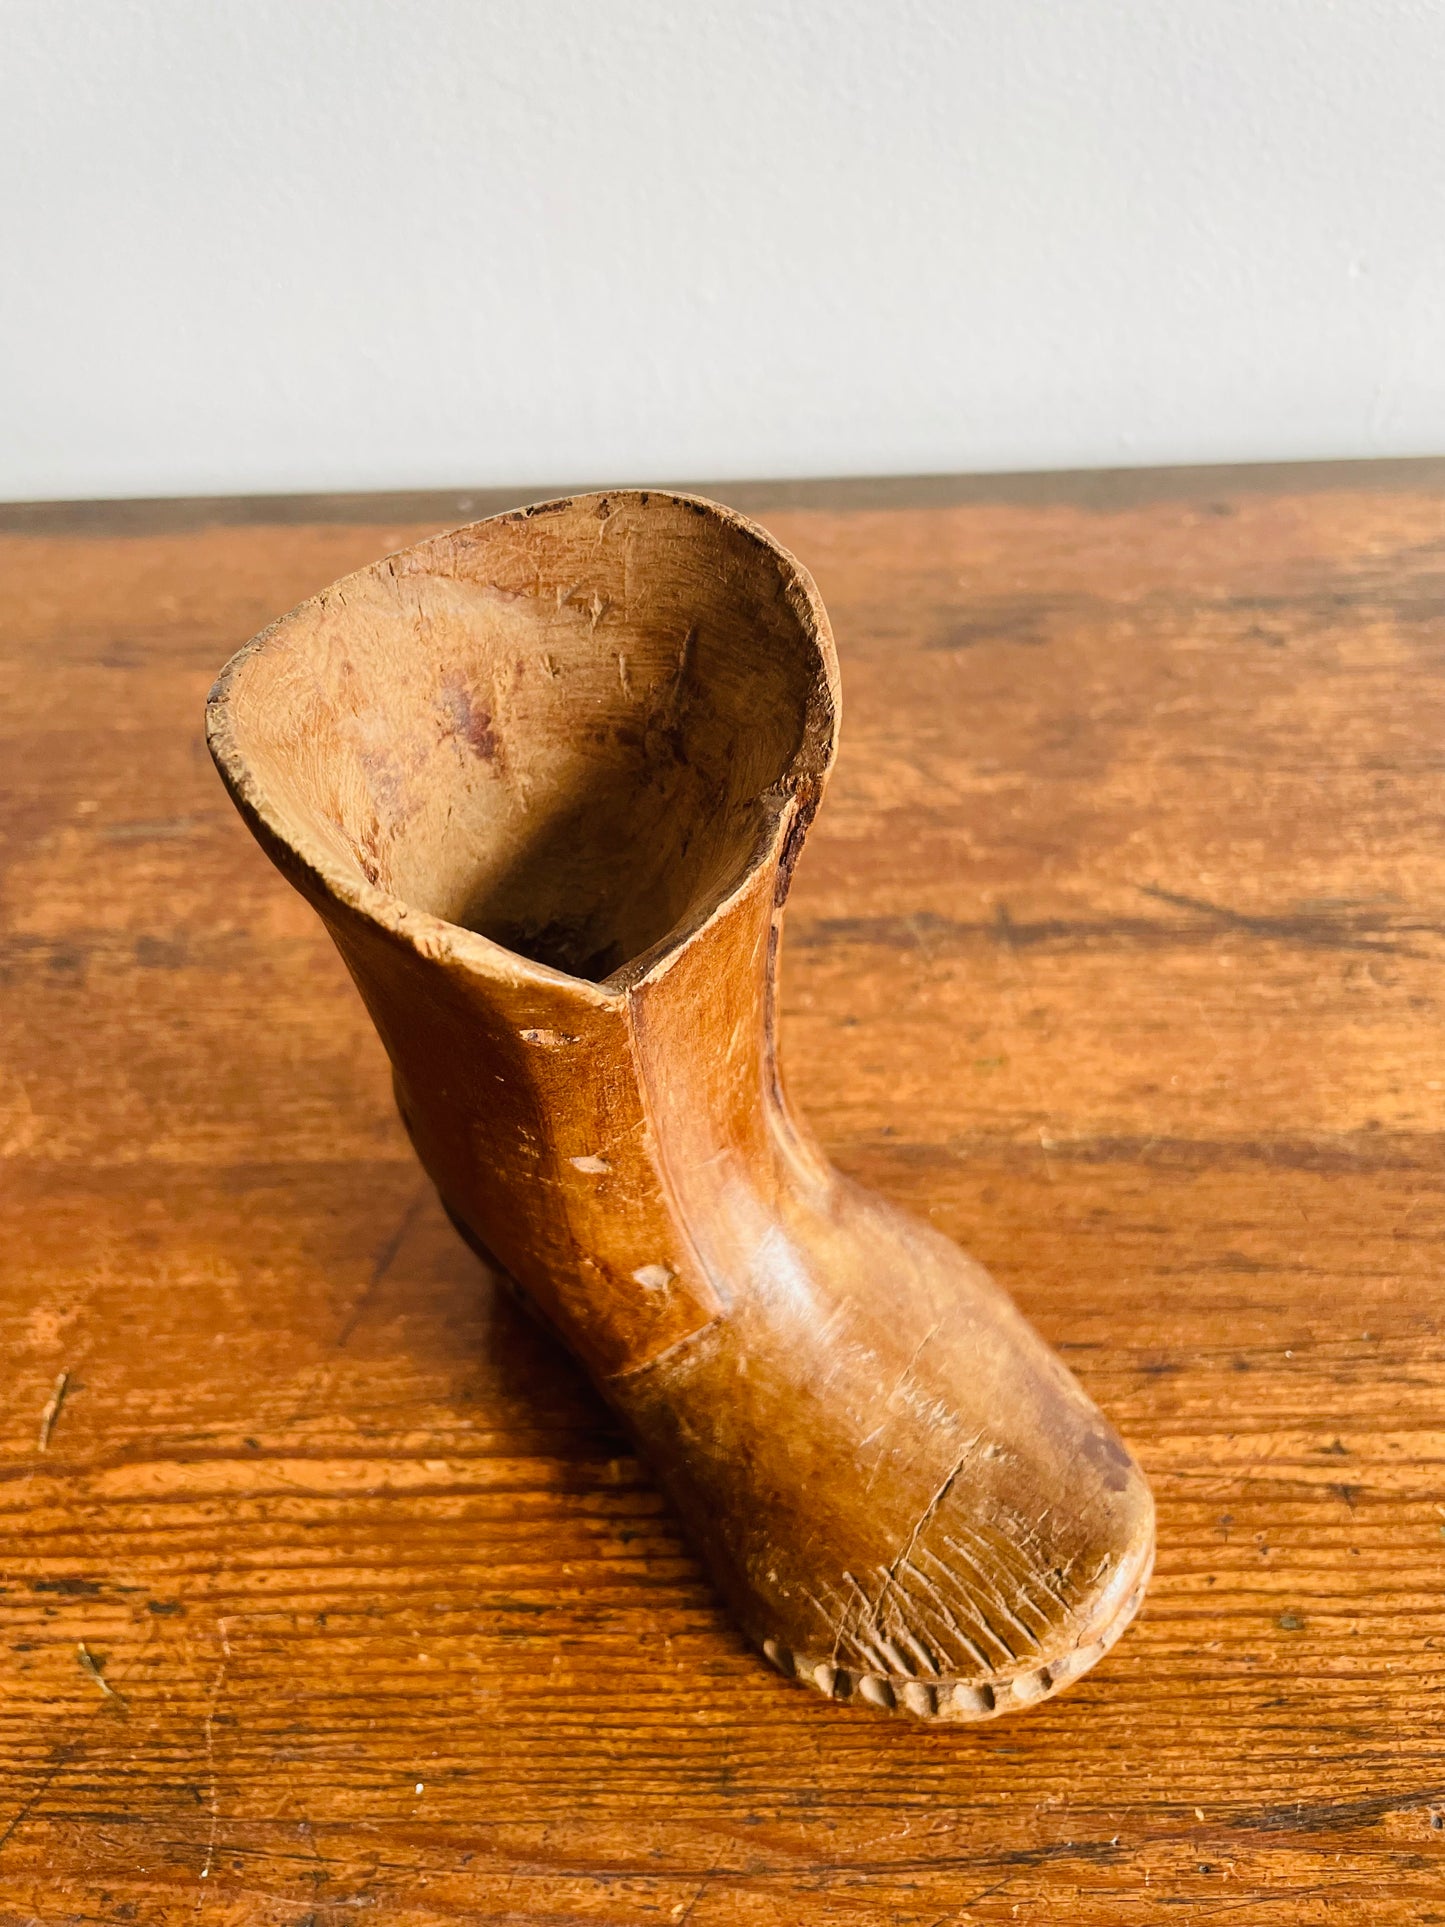 Handmade Wooden Boot Shoe - Carved From a Single Piece of Wood!